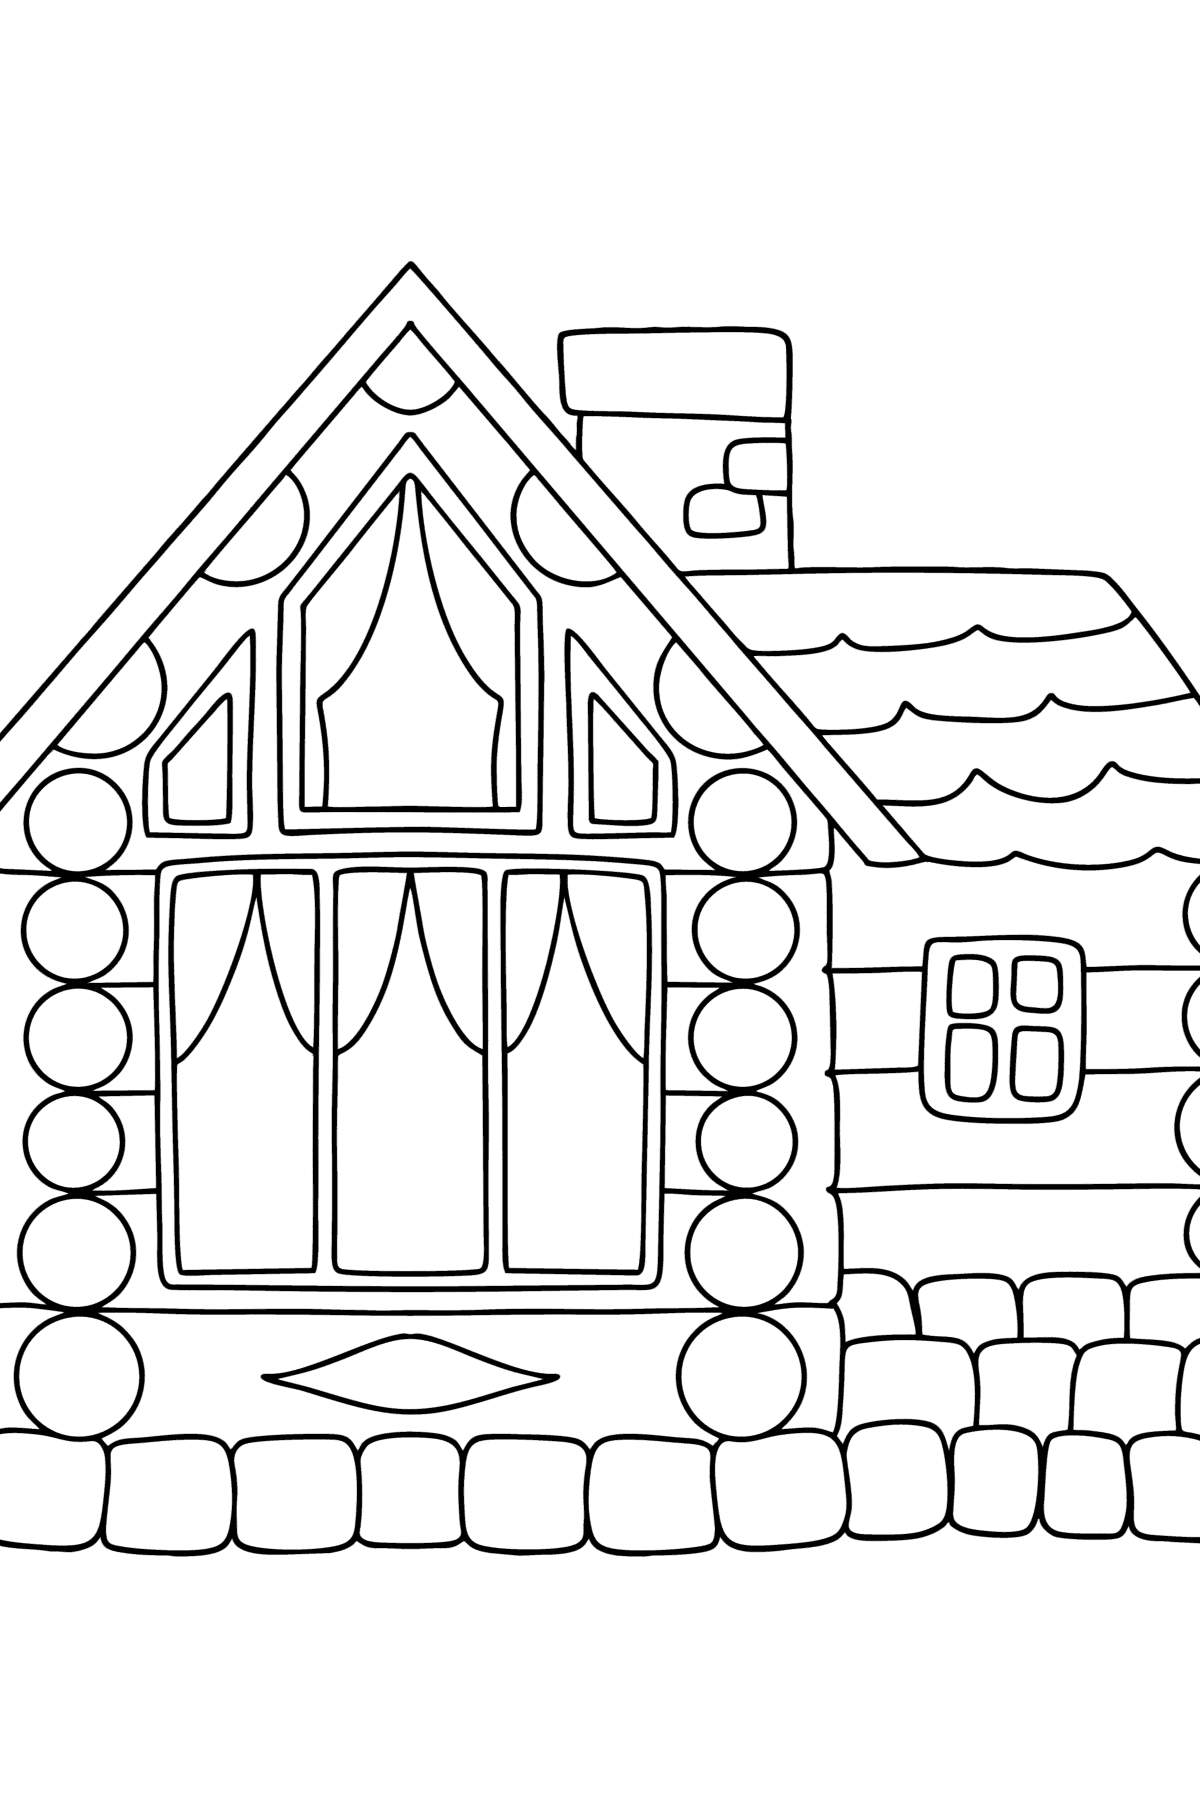 Log Cabin in Wood coloring page - Coloring Pages for Kids